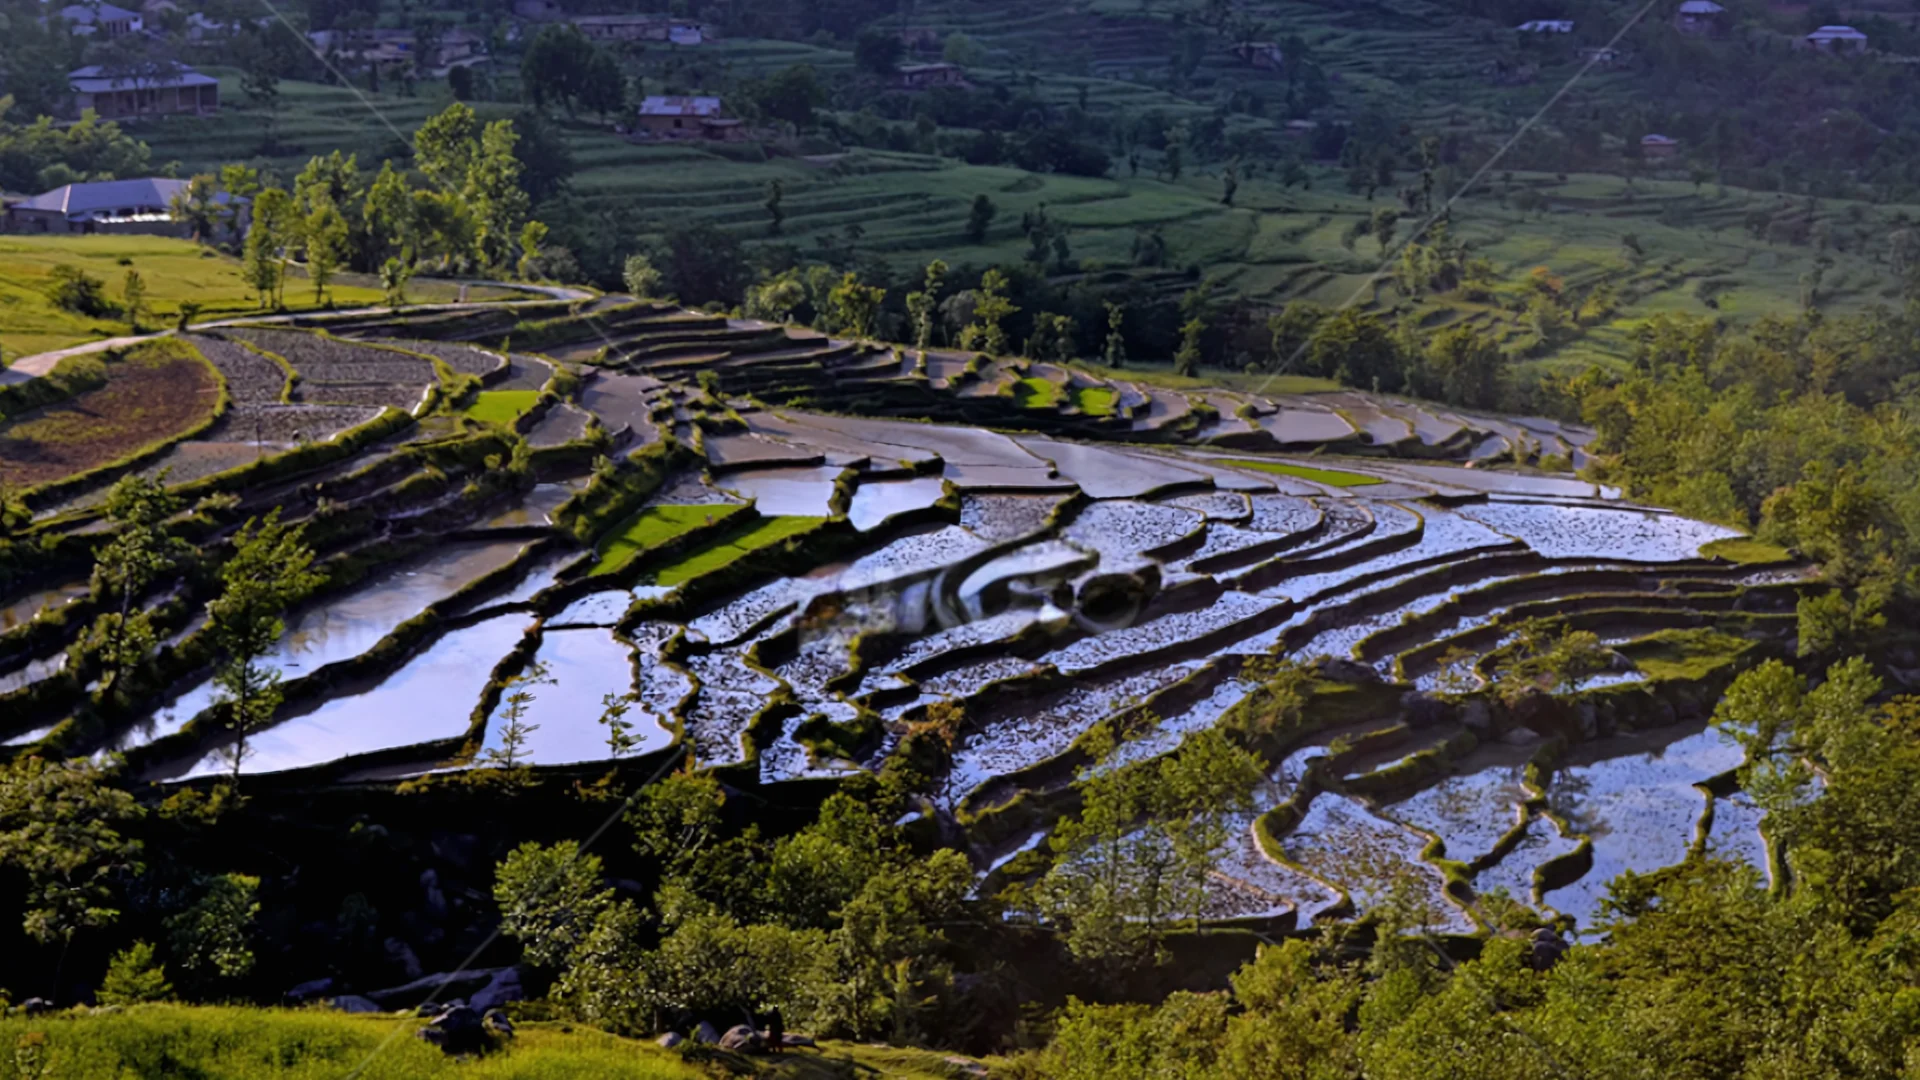 Terraced rice fields of Battagram, in the Hazara Division of Khyber Pakhtunkhwa, Pakistan. This areas is famed for their mountains, thick forests, fertile lands, and enchanting streams [Image Credits: Shehzaad Khan, Pixoto].